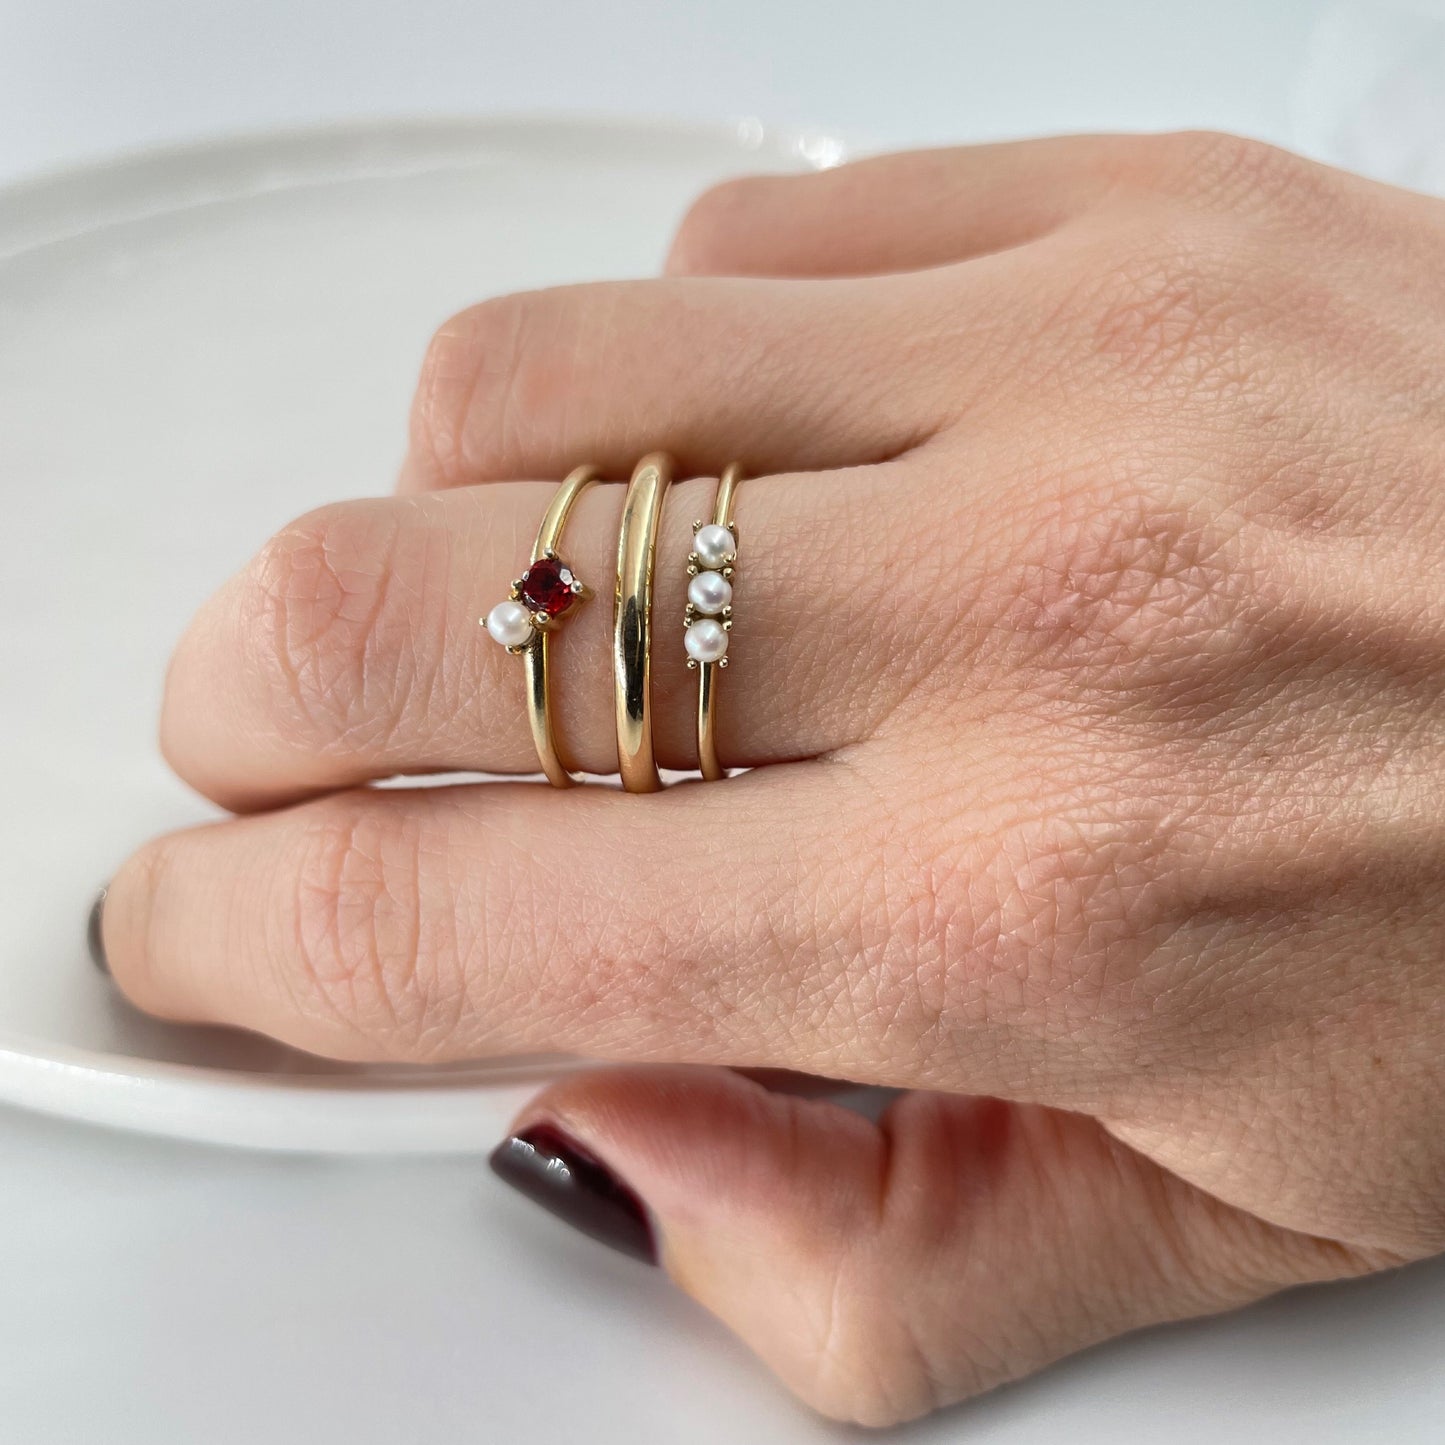 9kt gold stacking rings from Collective & Co. online jewellery store